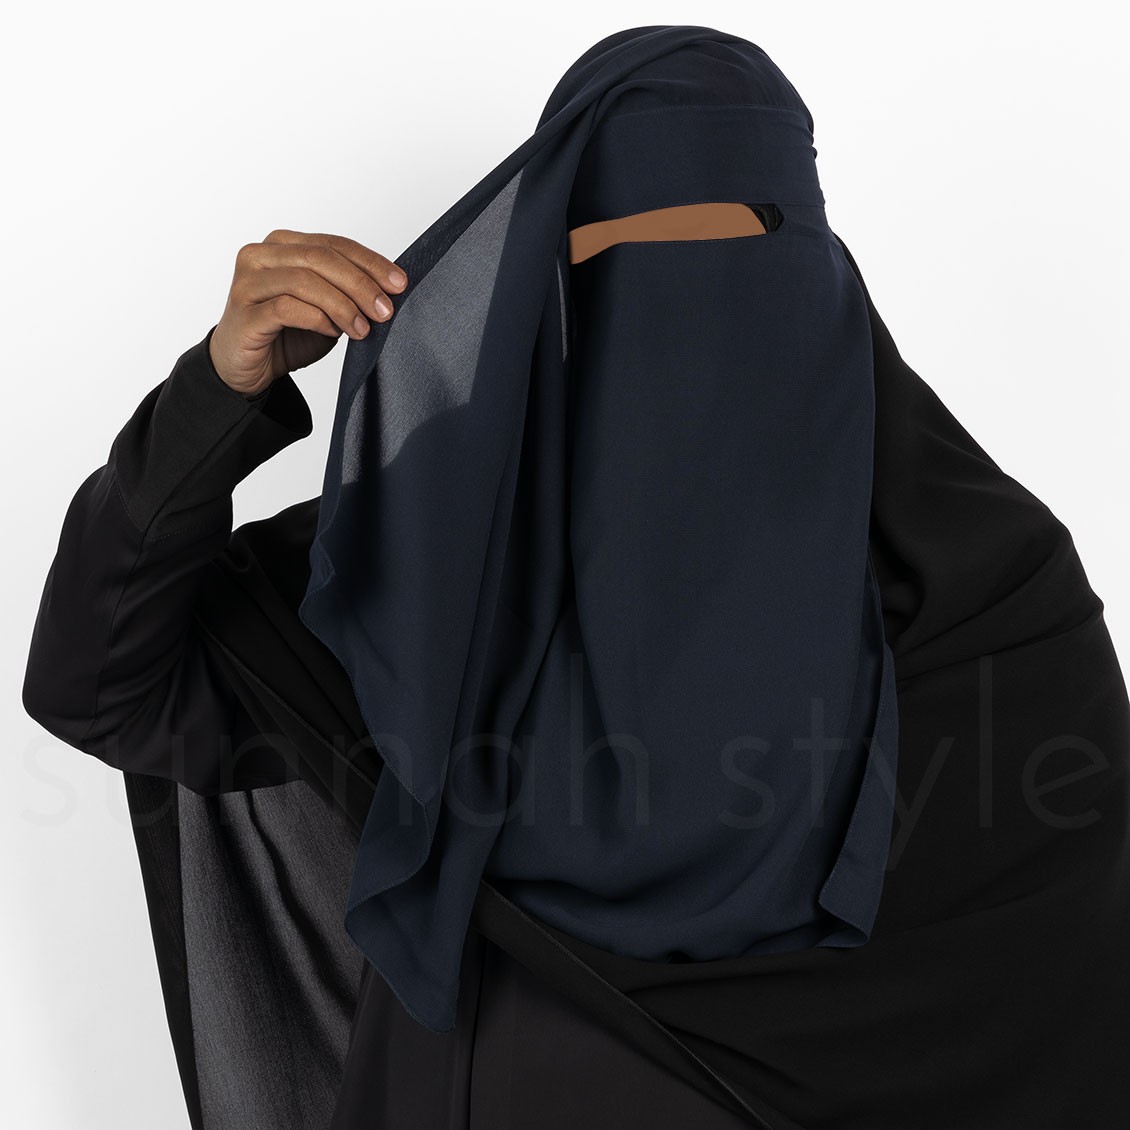 Sunnah Style No-Pinch Two Layer Niqab Navy Blue